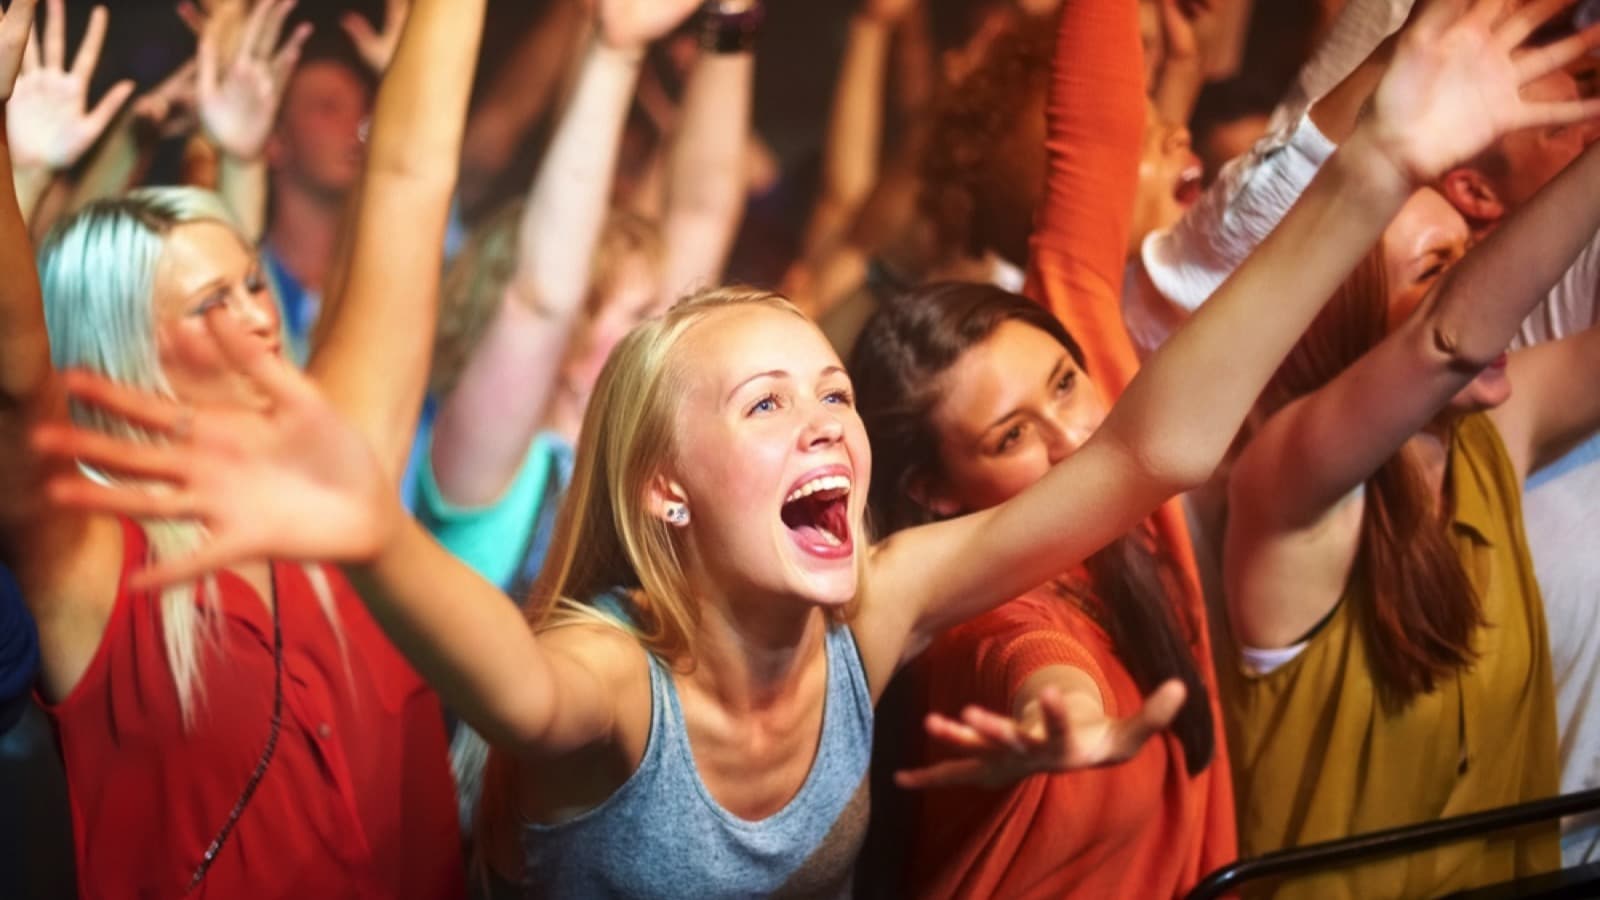 Woman Caught Up In Vibe Of The Show